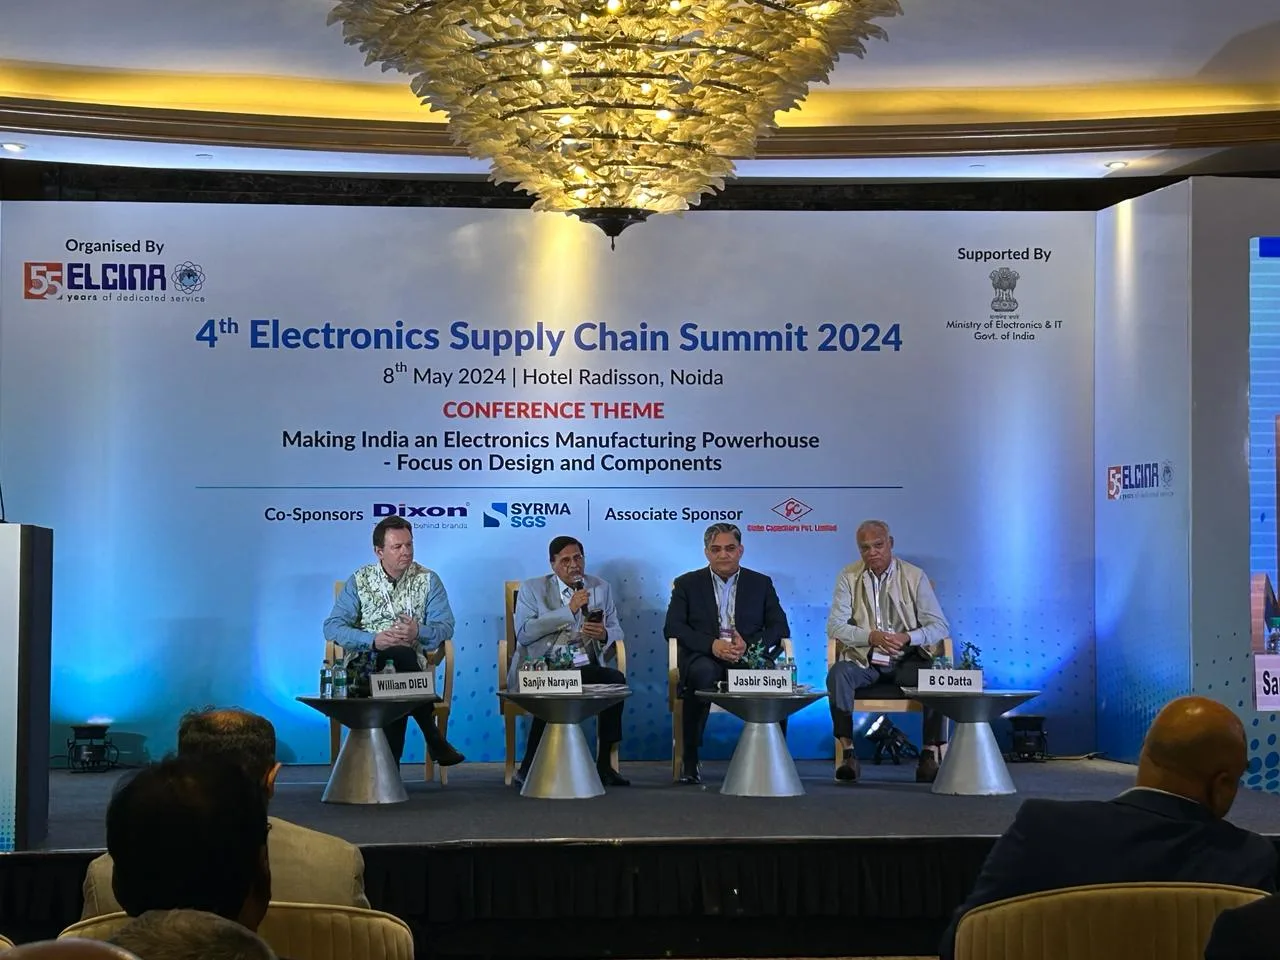 Syrma SGS is excited to be part of the 4th Electronics Supply Chain Summit 2024 in Noida!